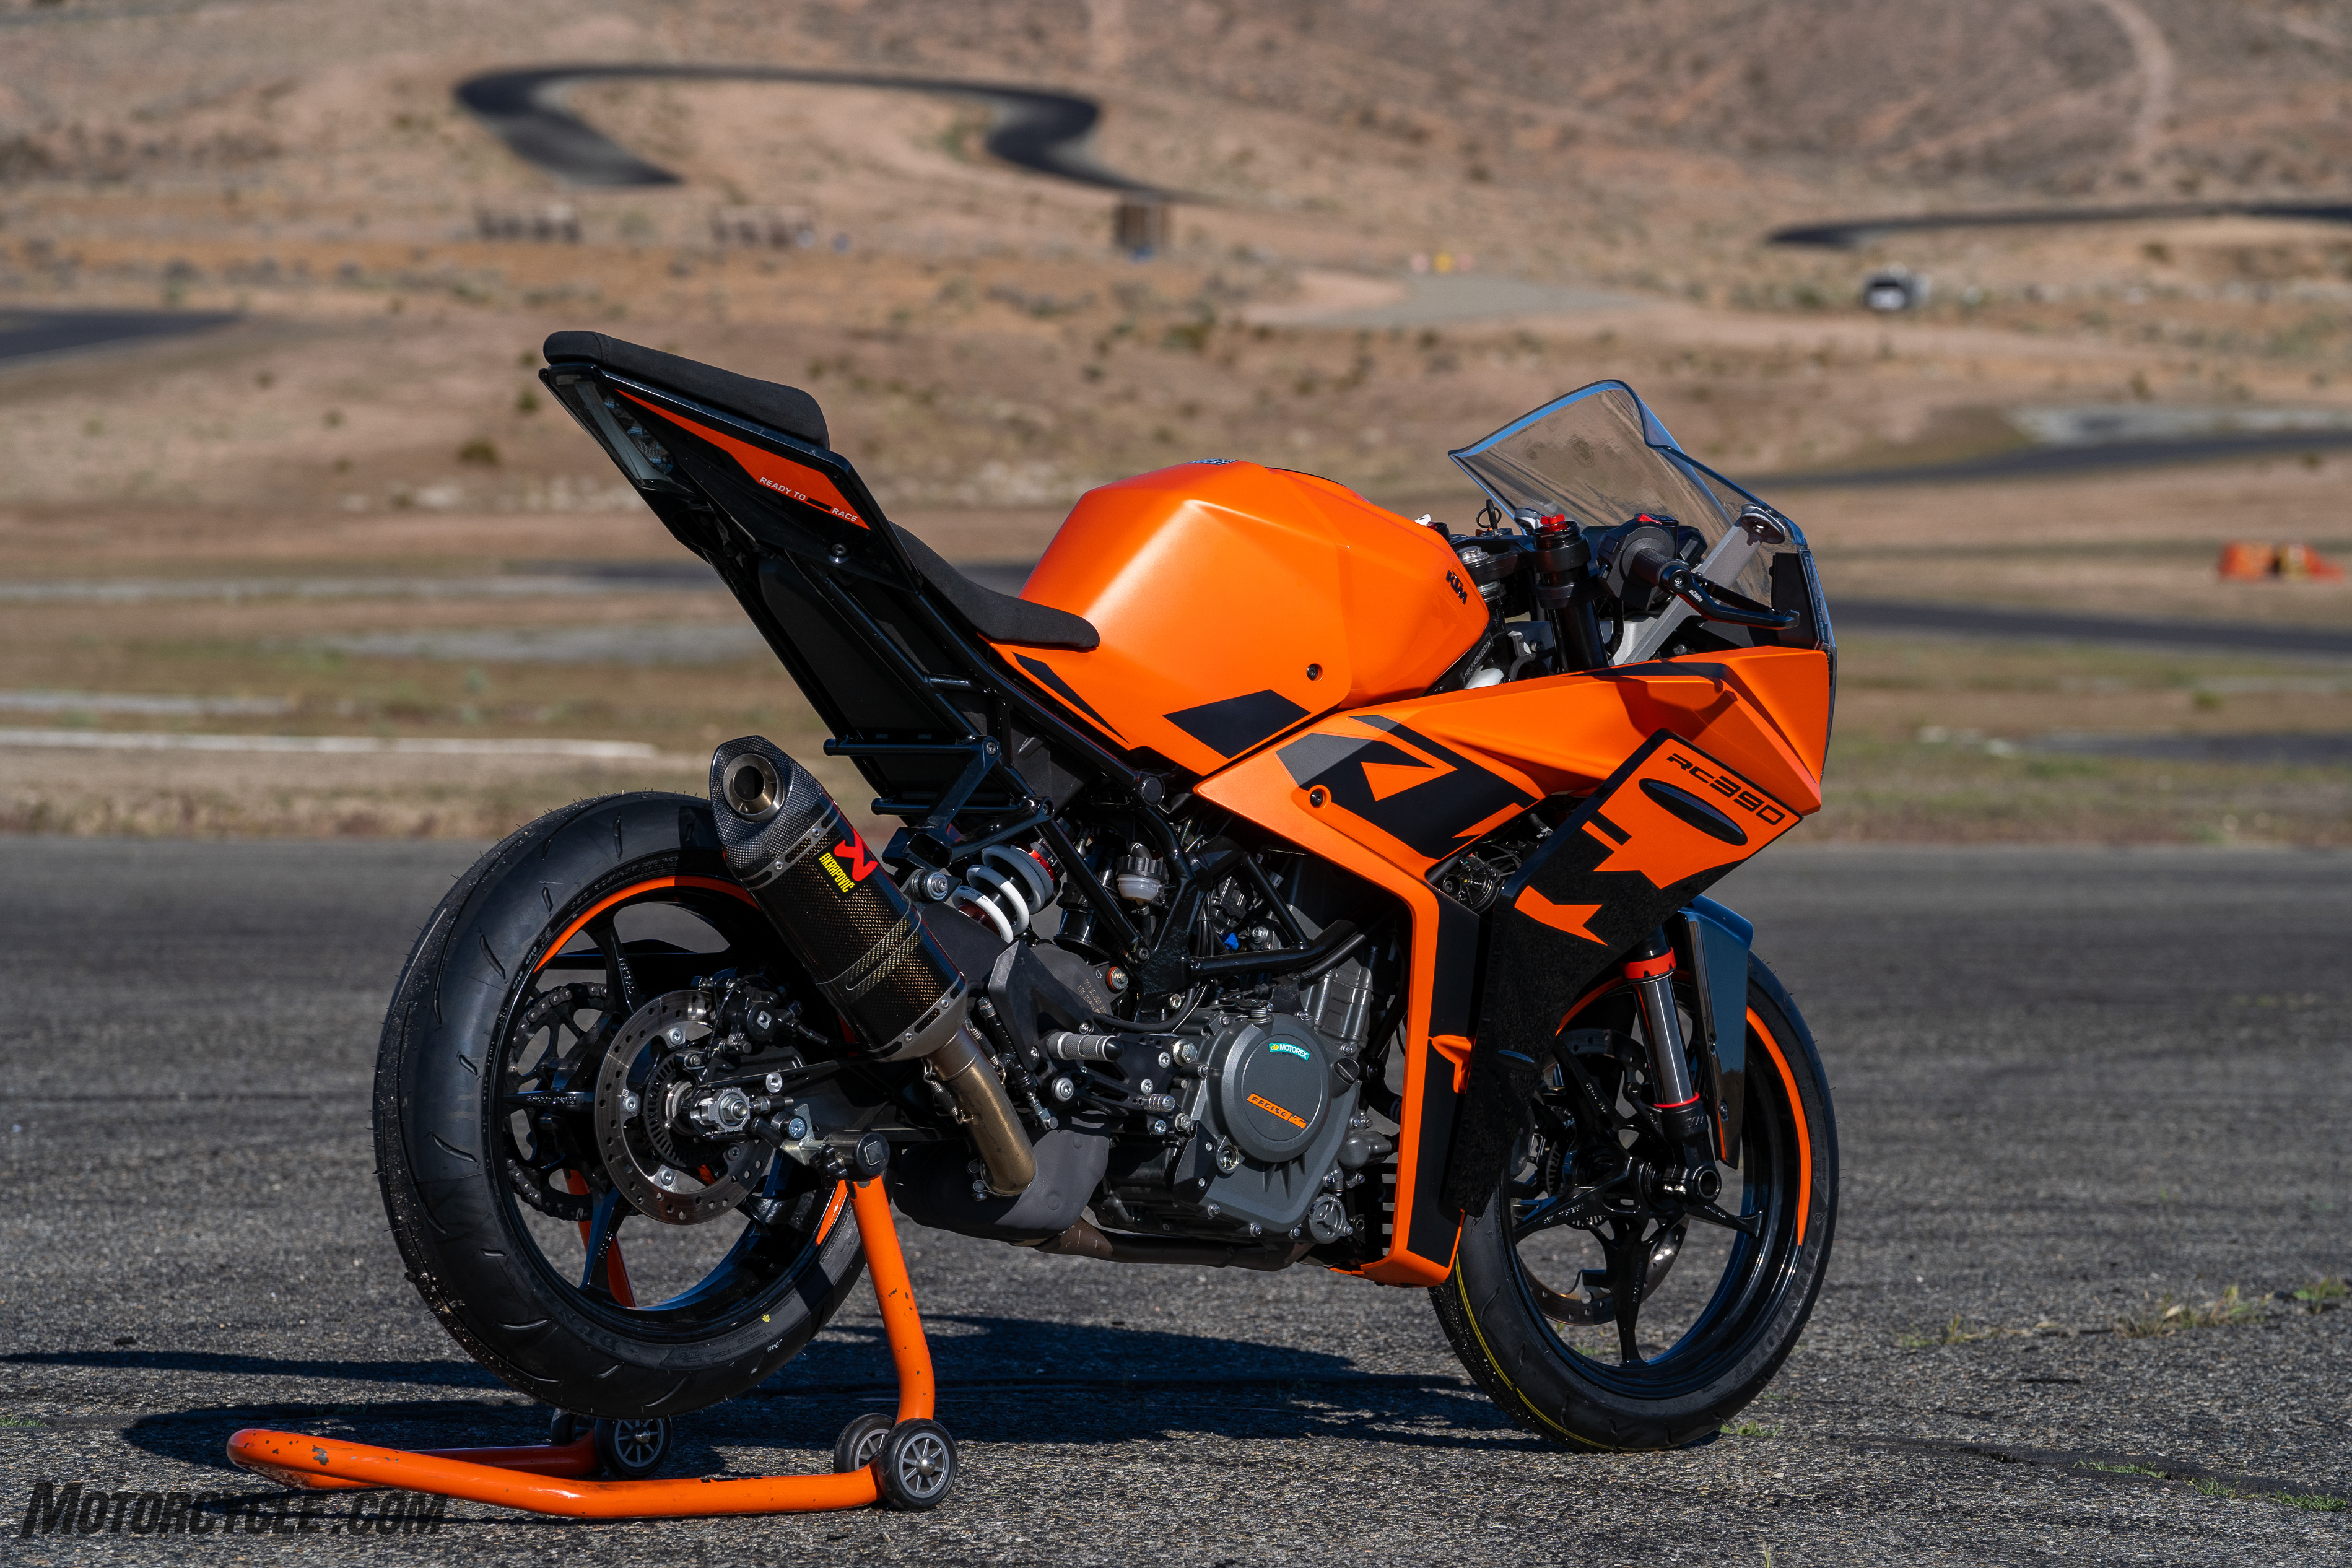 KTM RC390 rear view motorcycle